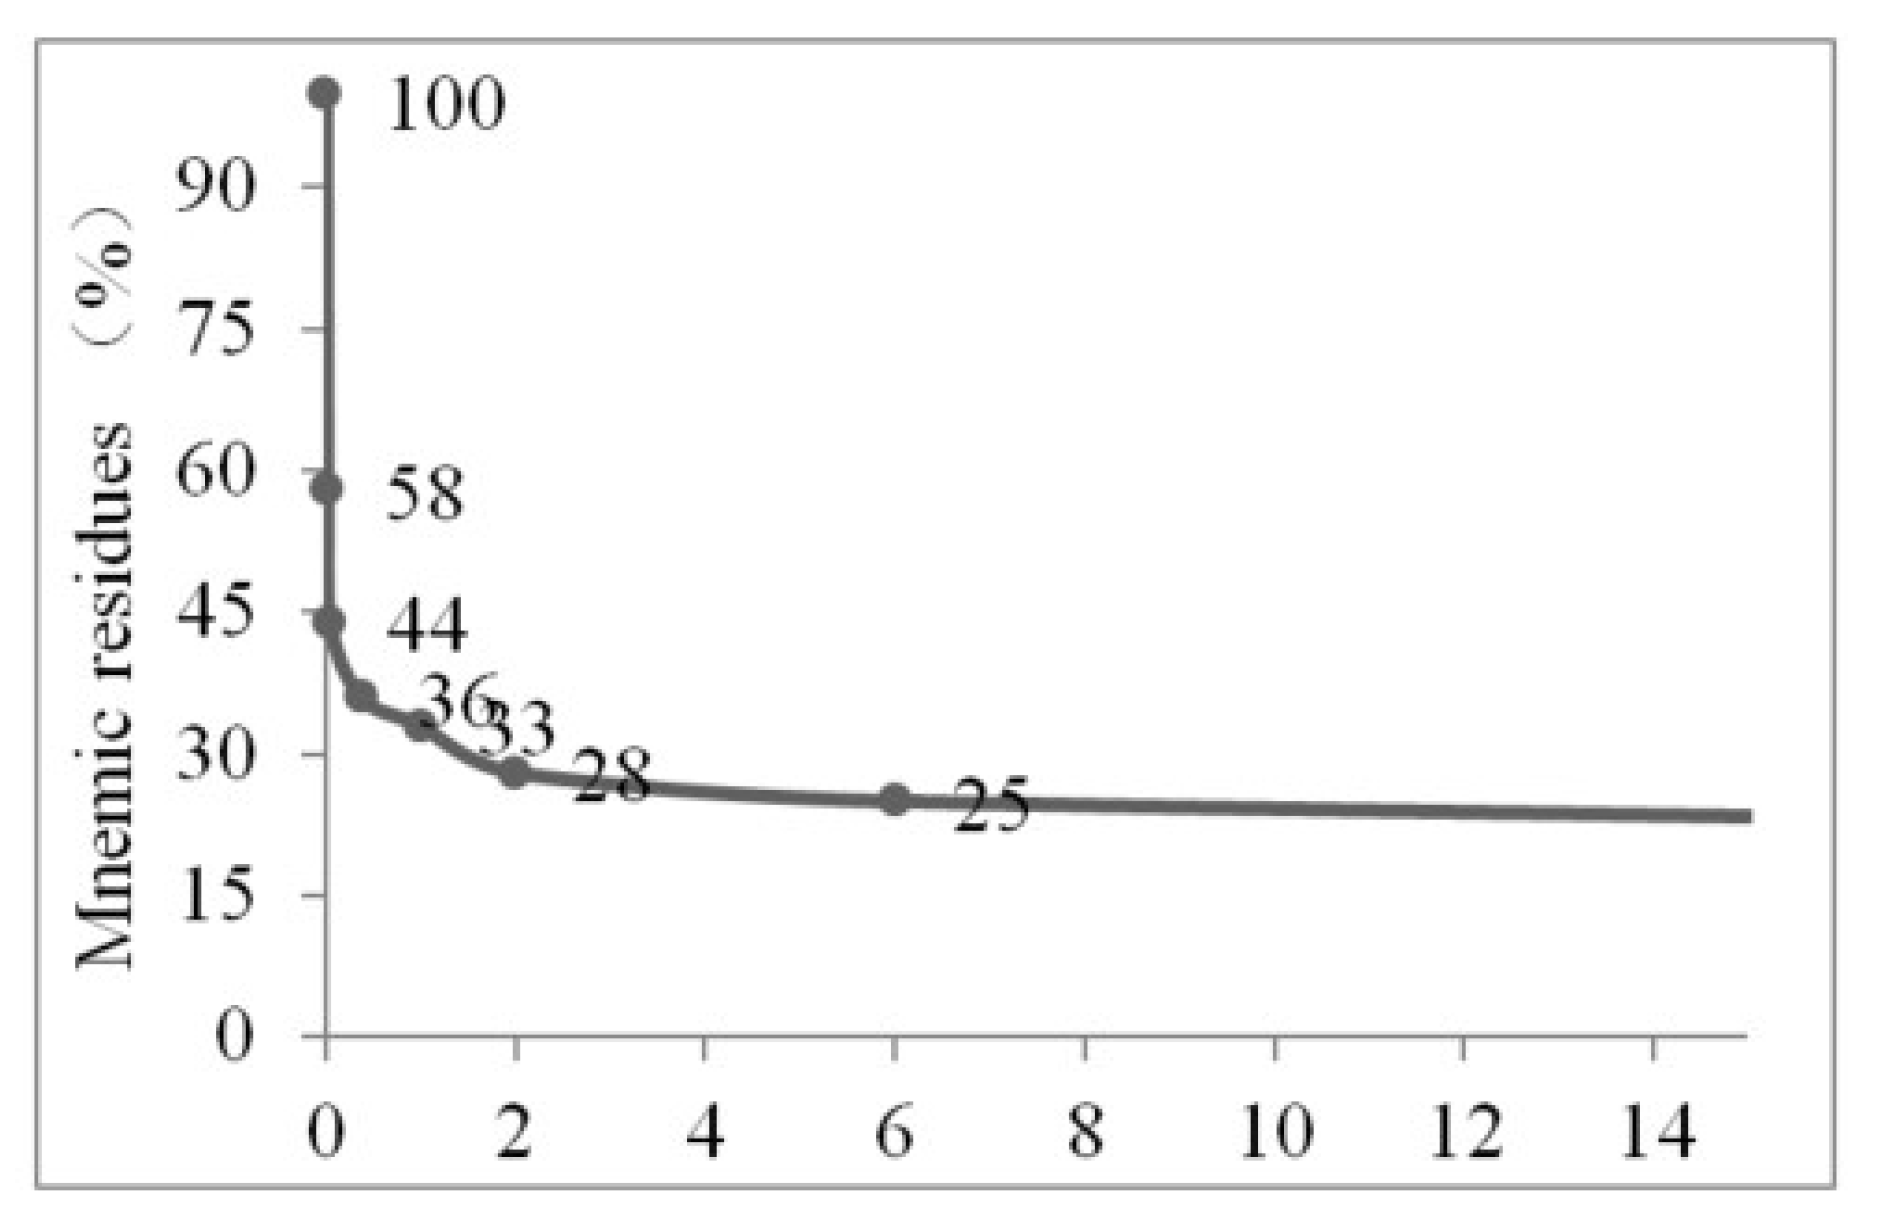 Ebbinghaus forgetting curve and importance of reviewing [15].